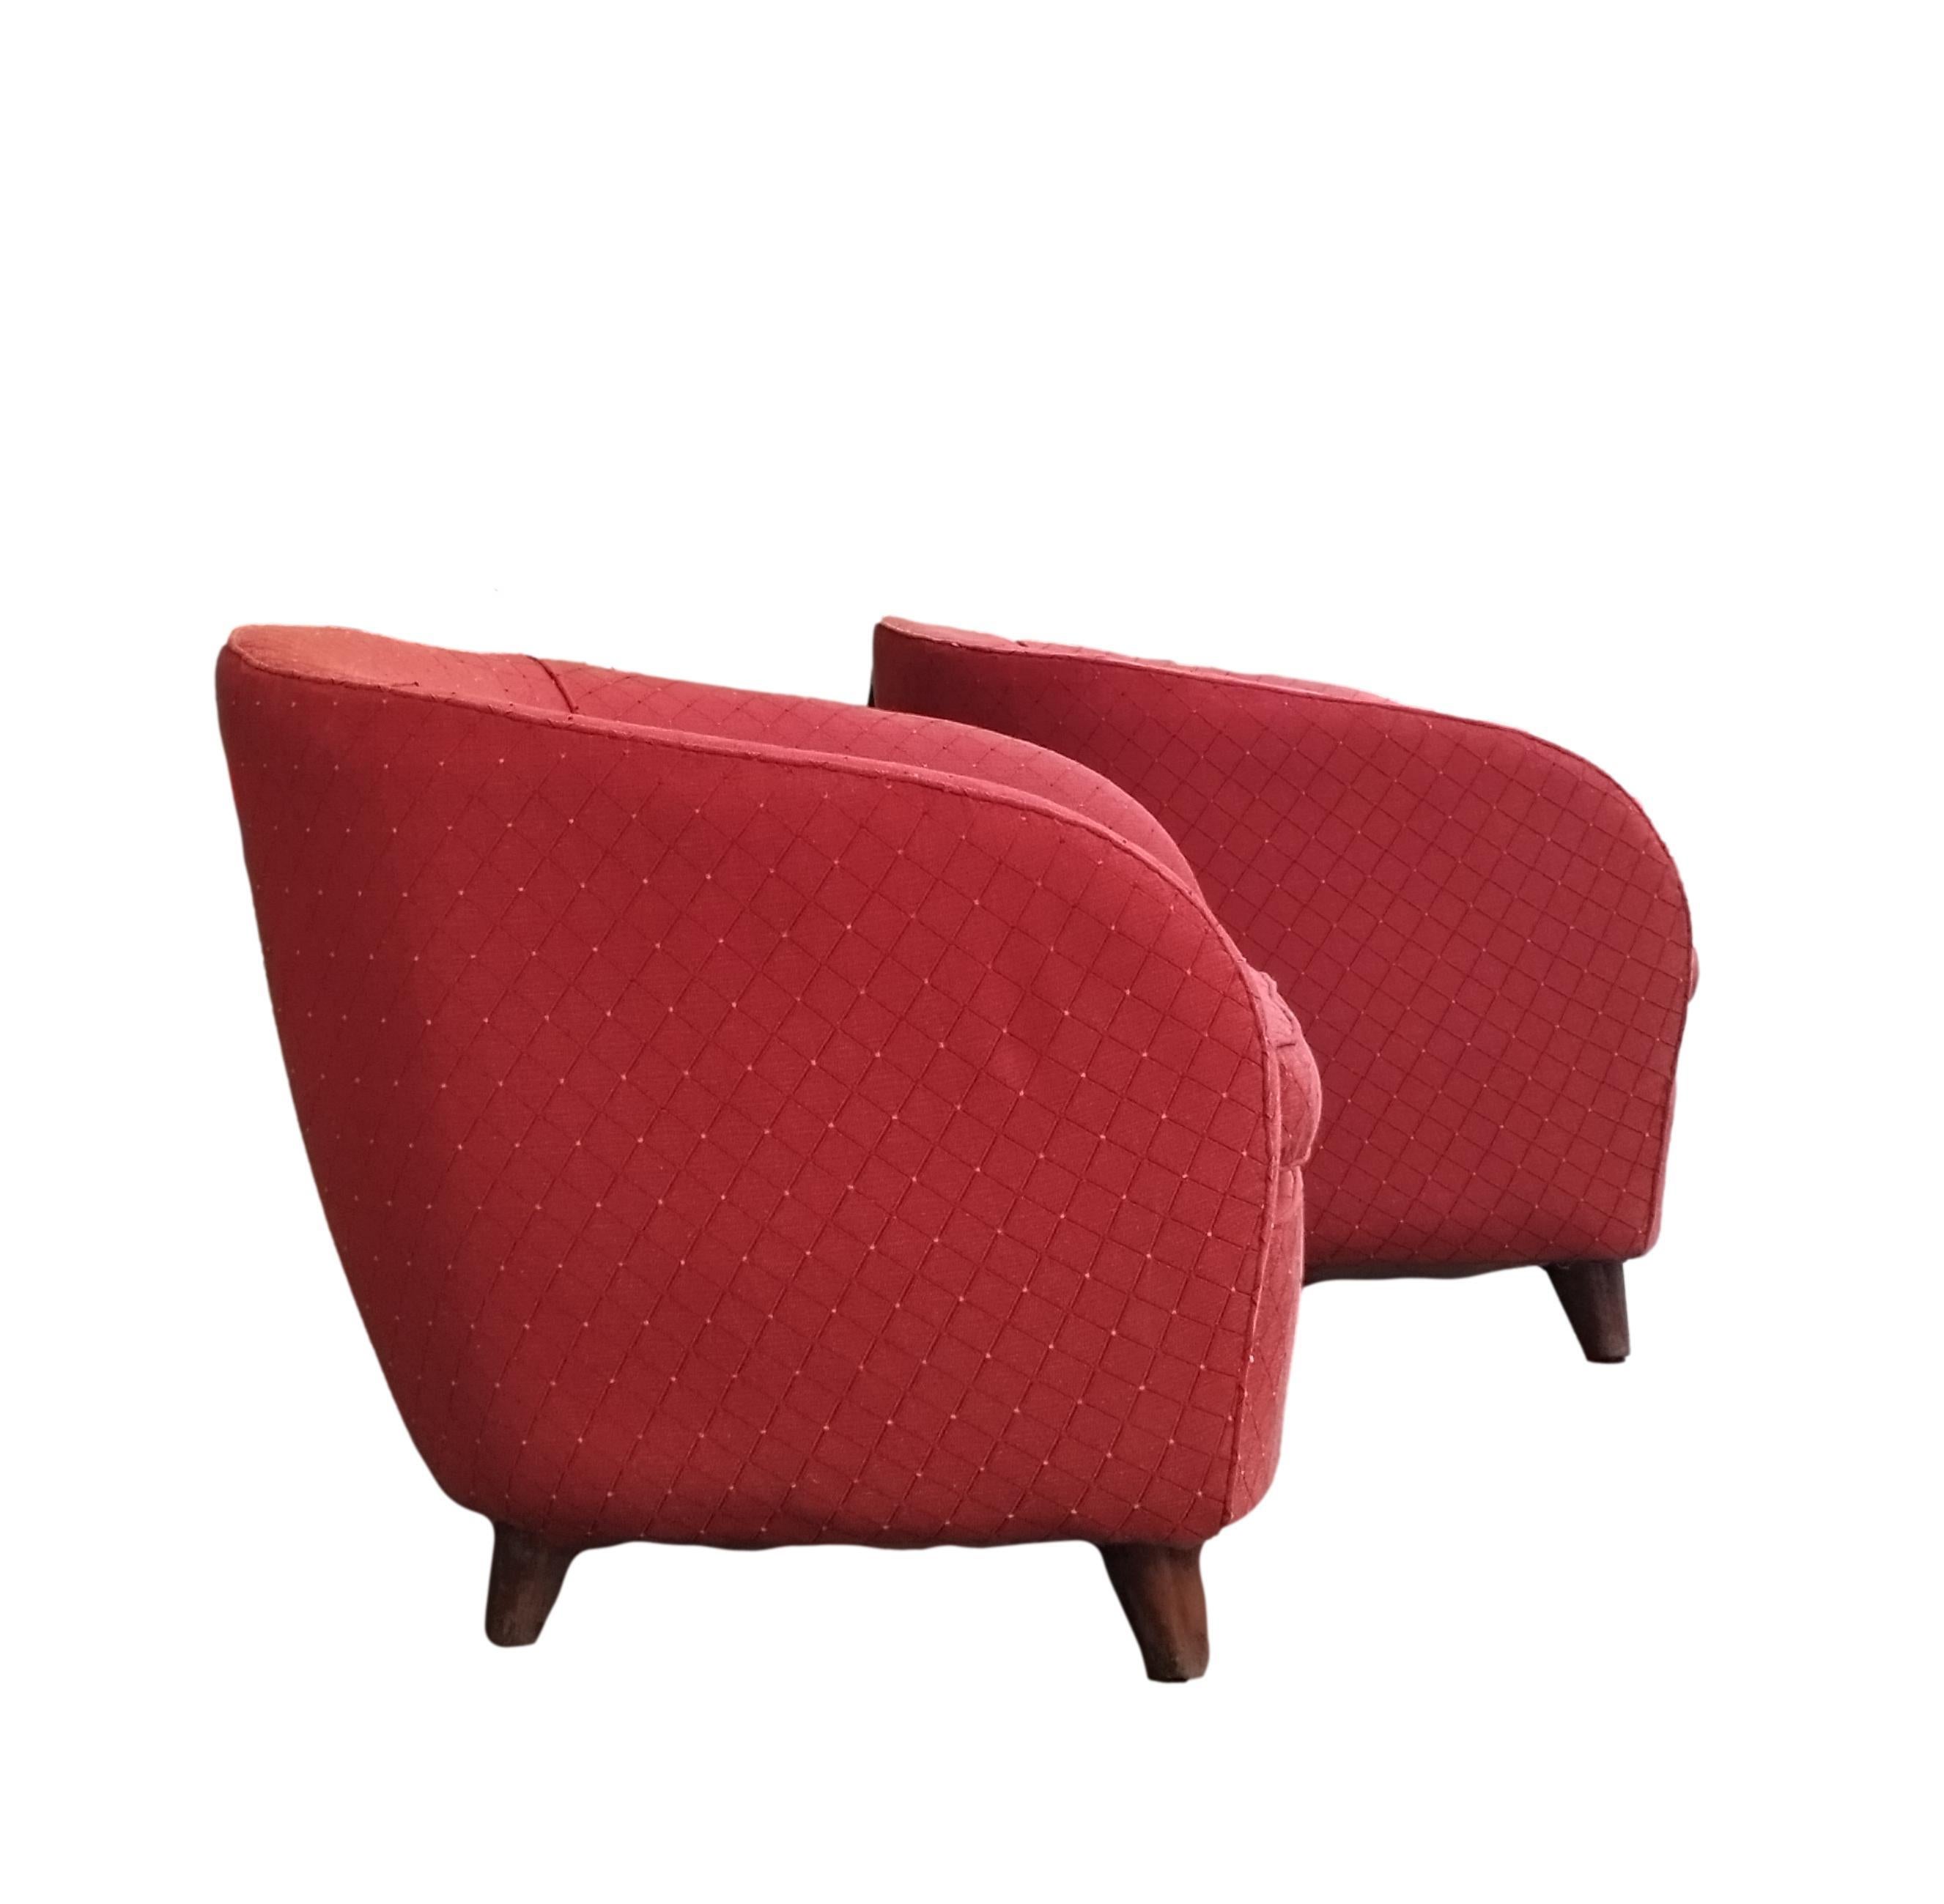 Mid-Century Modern Gio Ponti Attrib. Pair of Red Fabric Armchairs, Italy 1950s For Sale